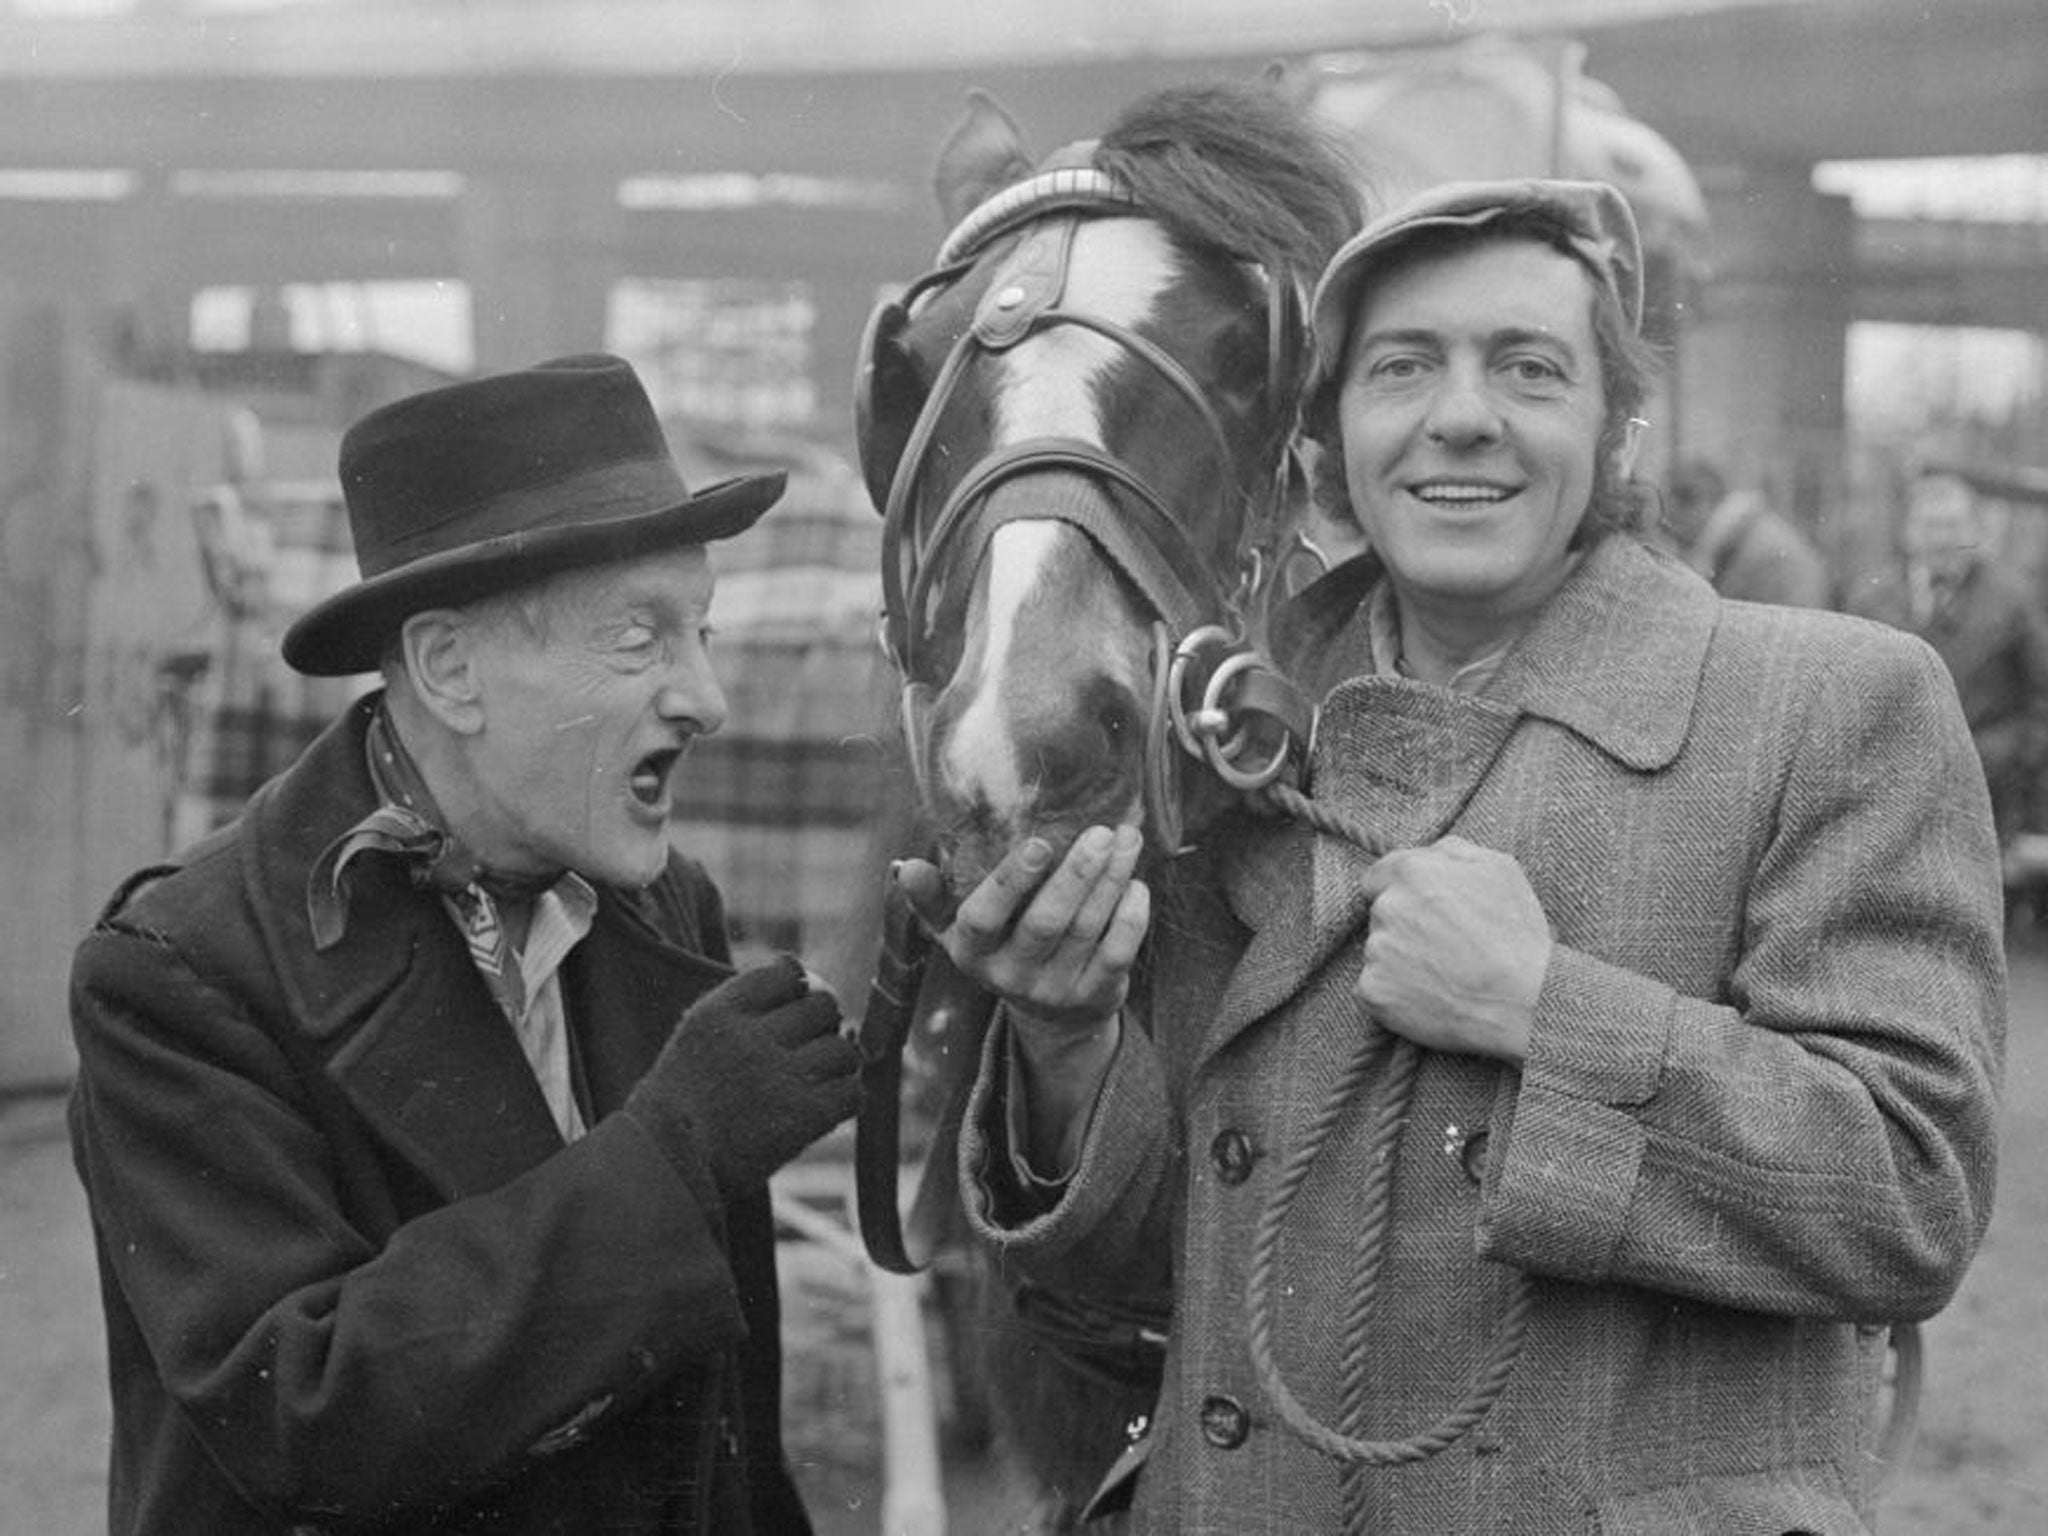 Steptoe and Son was one of a number of much-loved sitcoms originally featured on Comedy Playhouse